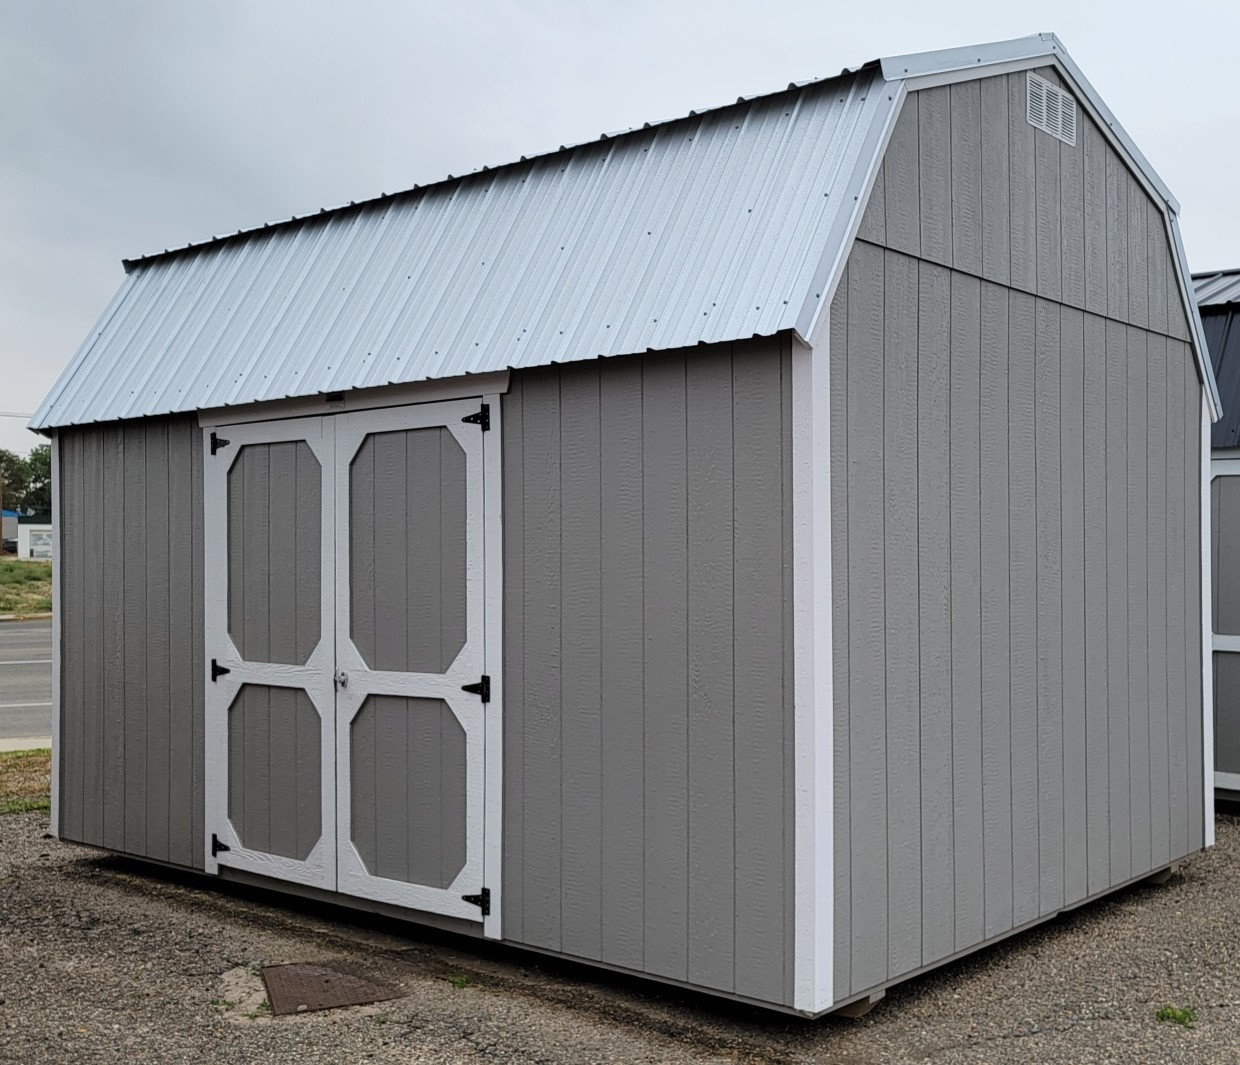 Buy Now: 10x16 Painted Lofted Barn Shed